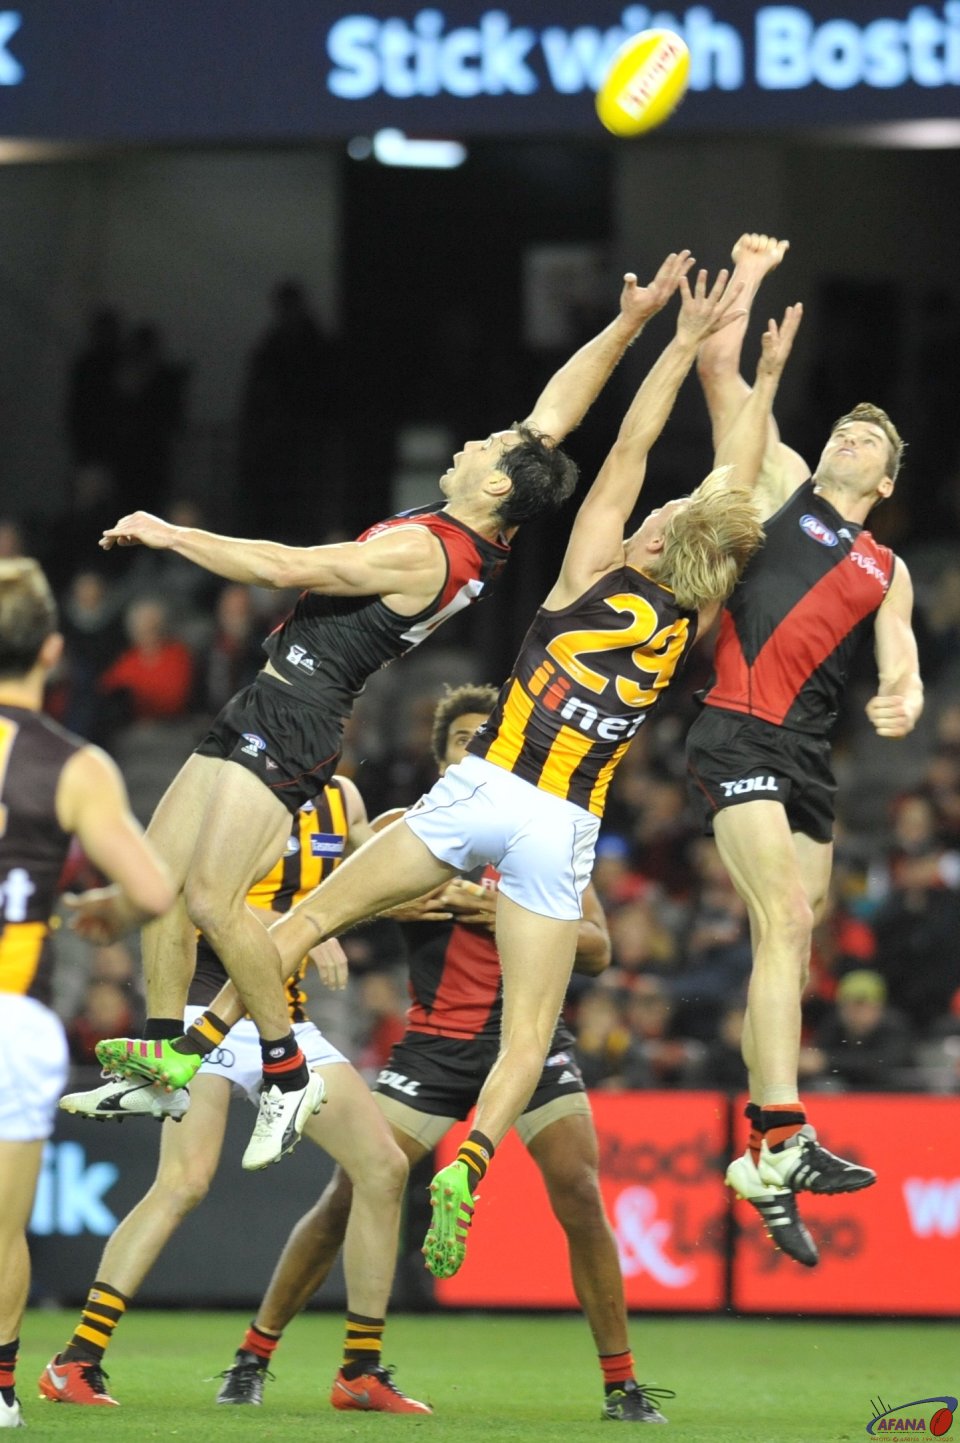 Desperate Bomber defence as Langford contests